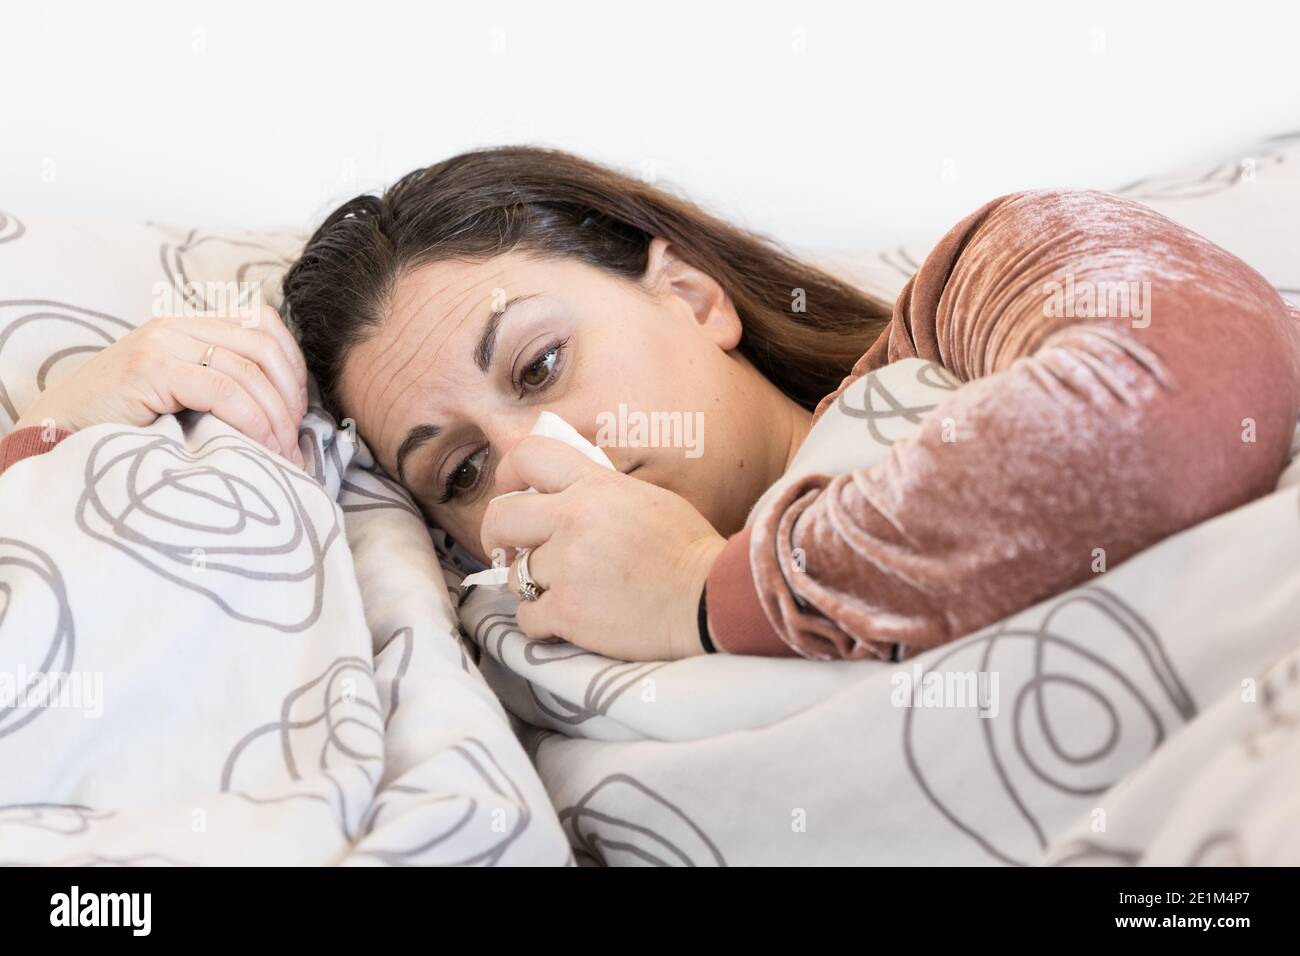 sick woman , flu or covid19 desease, cold and she has fever Stock Photo